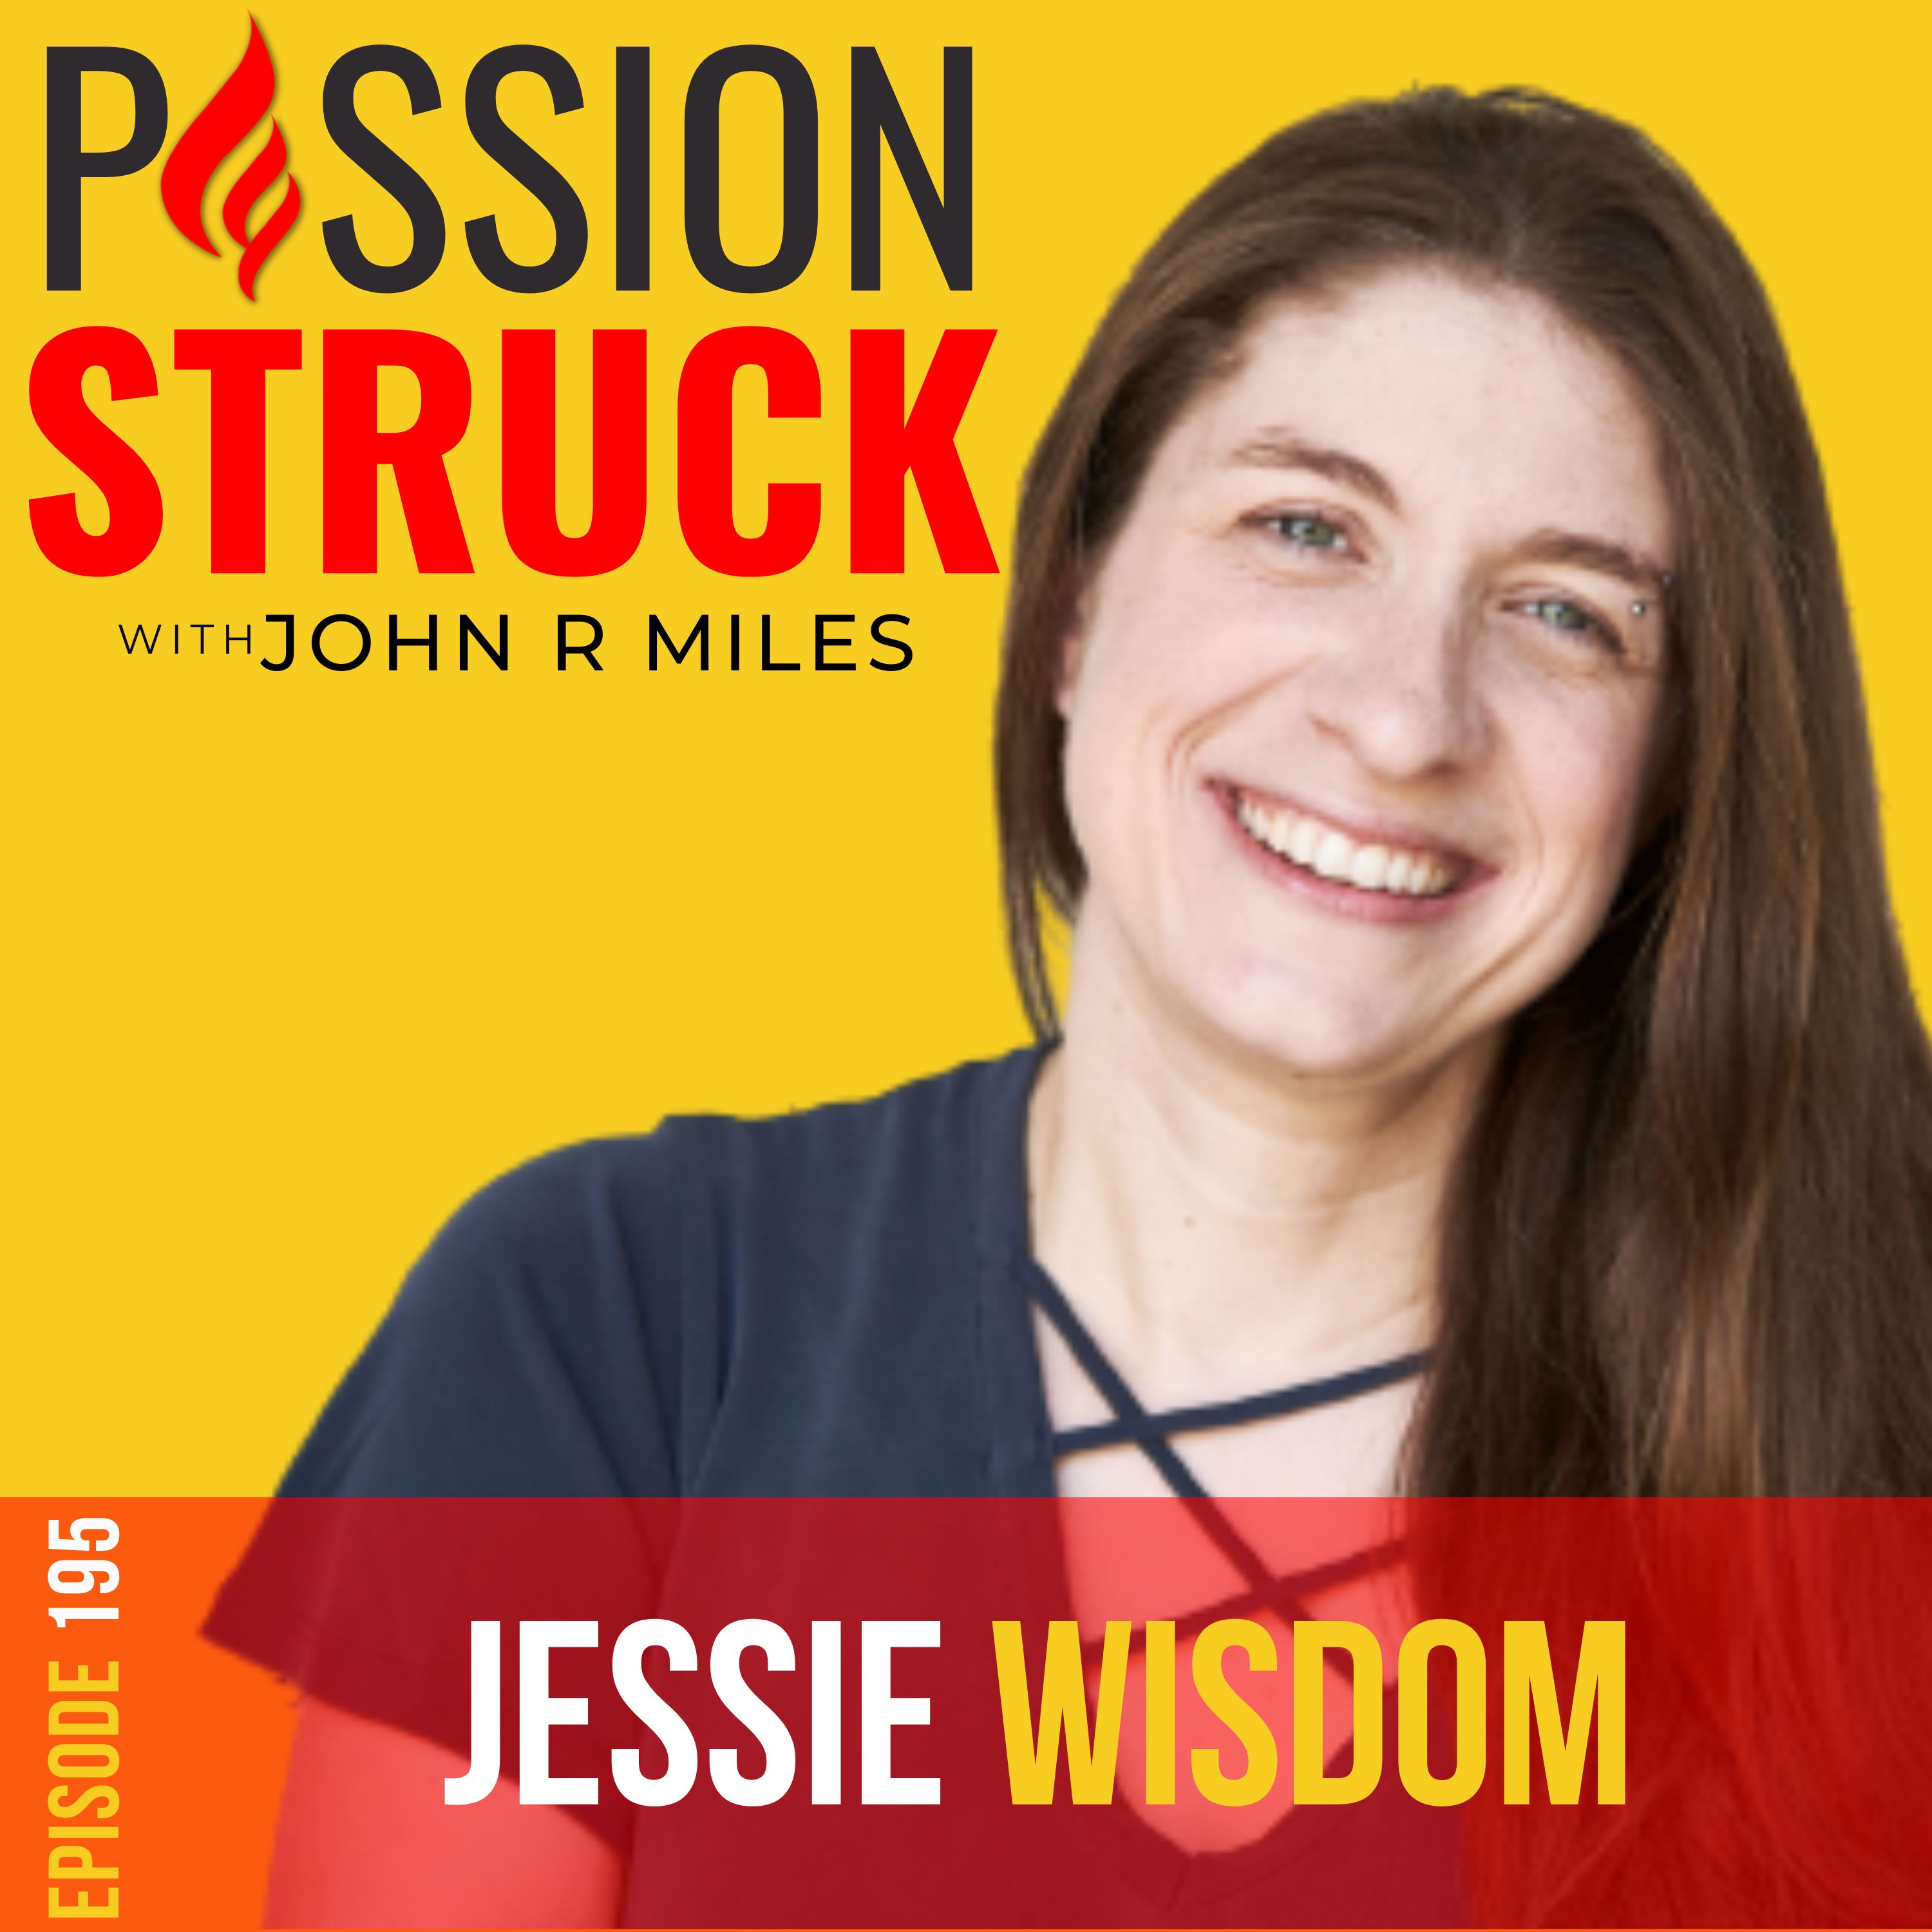 Passion Struck with John R. Miles, EP 195 album cover with Jessie Wisdom